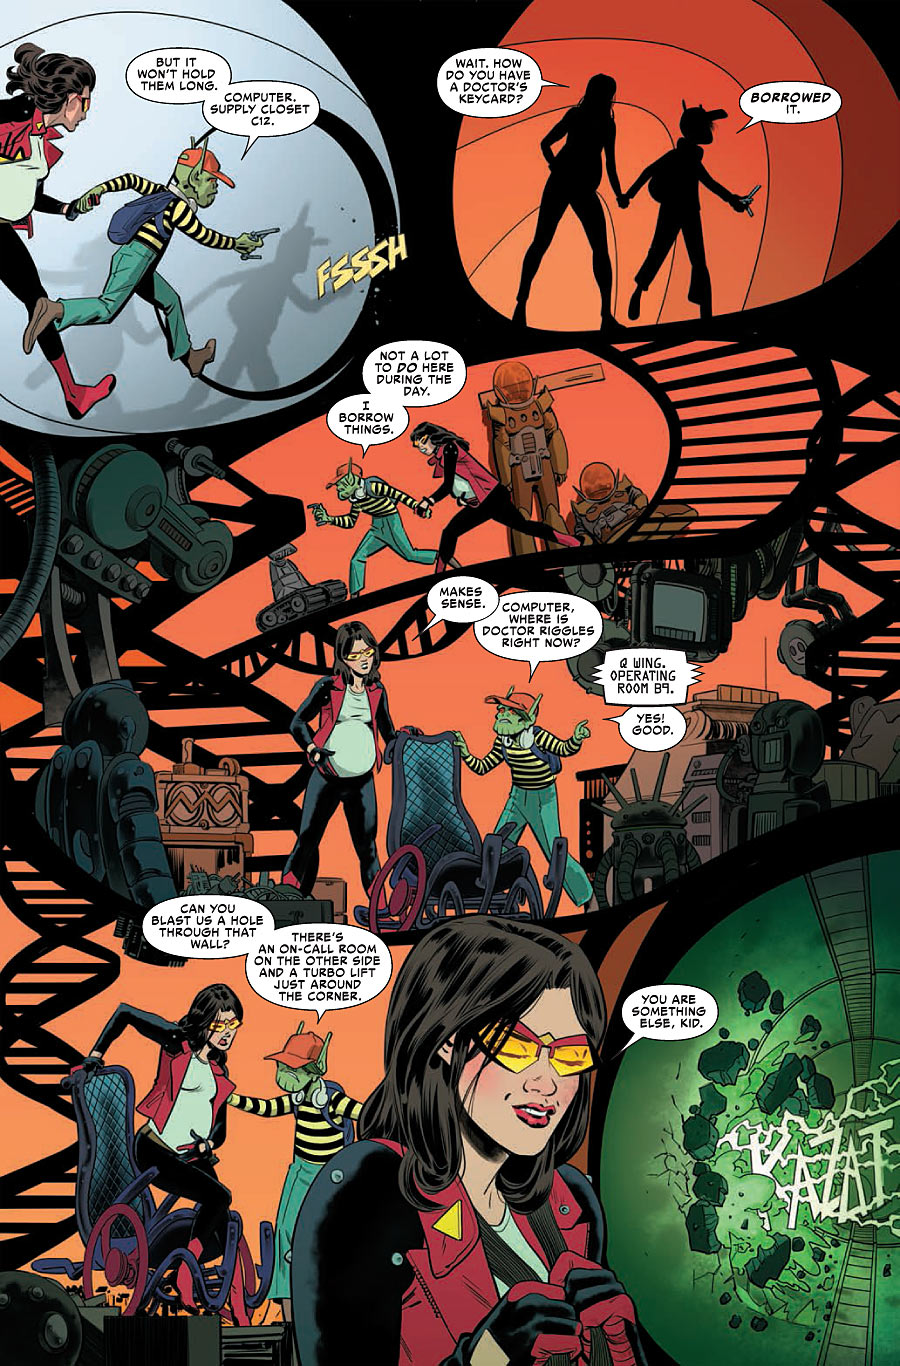 Spider-Woman #4 Color